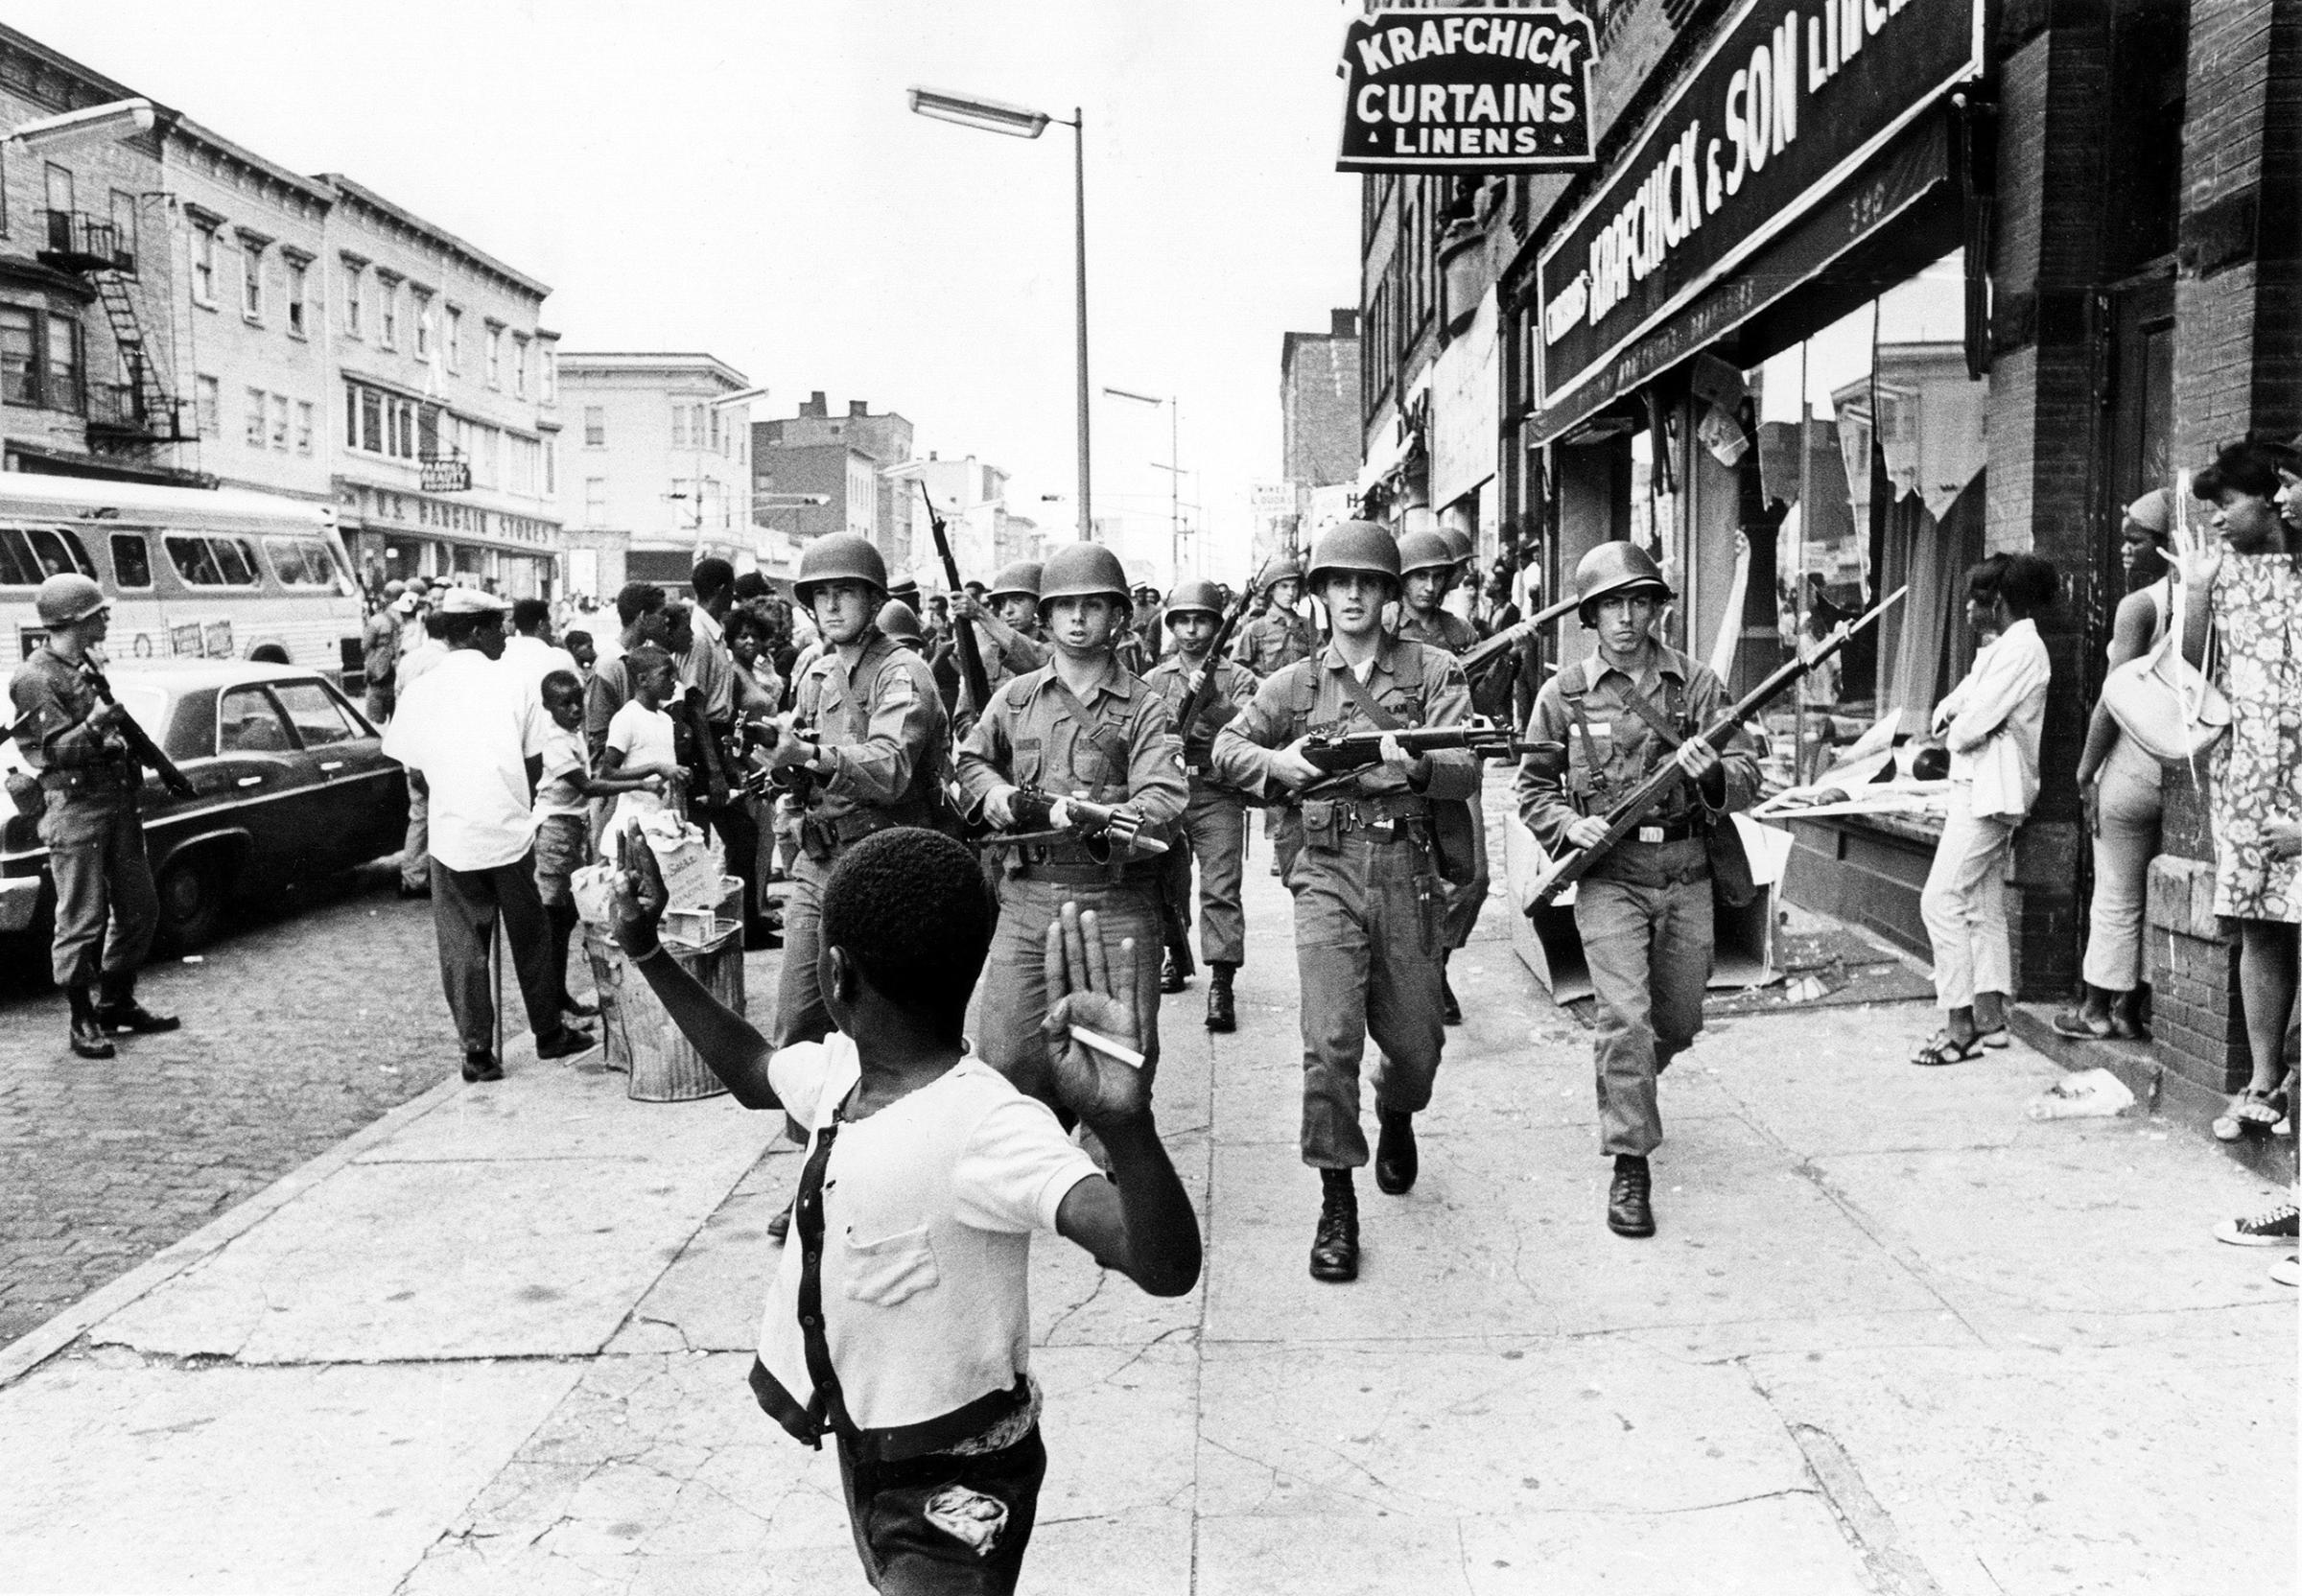 National Guard on Springfield Avenue in Newark, N.J. clearing the street on July 14, 1967, after rioting took place.